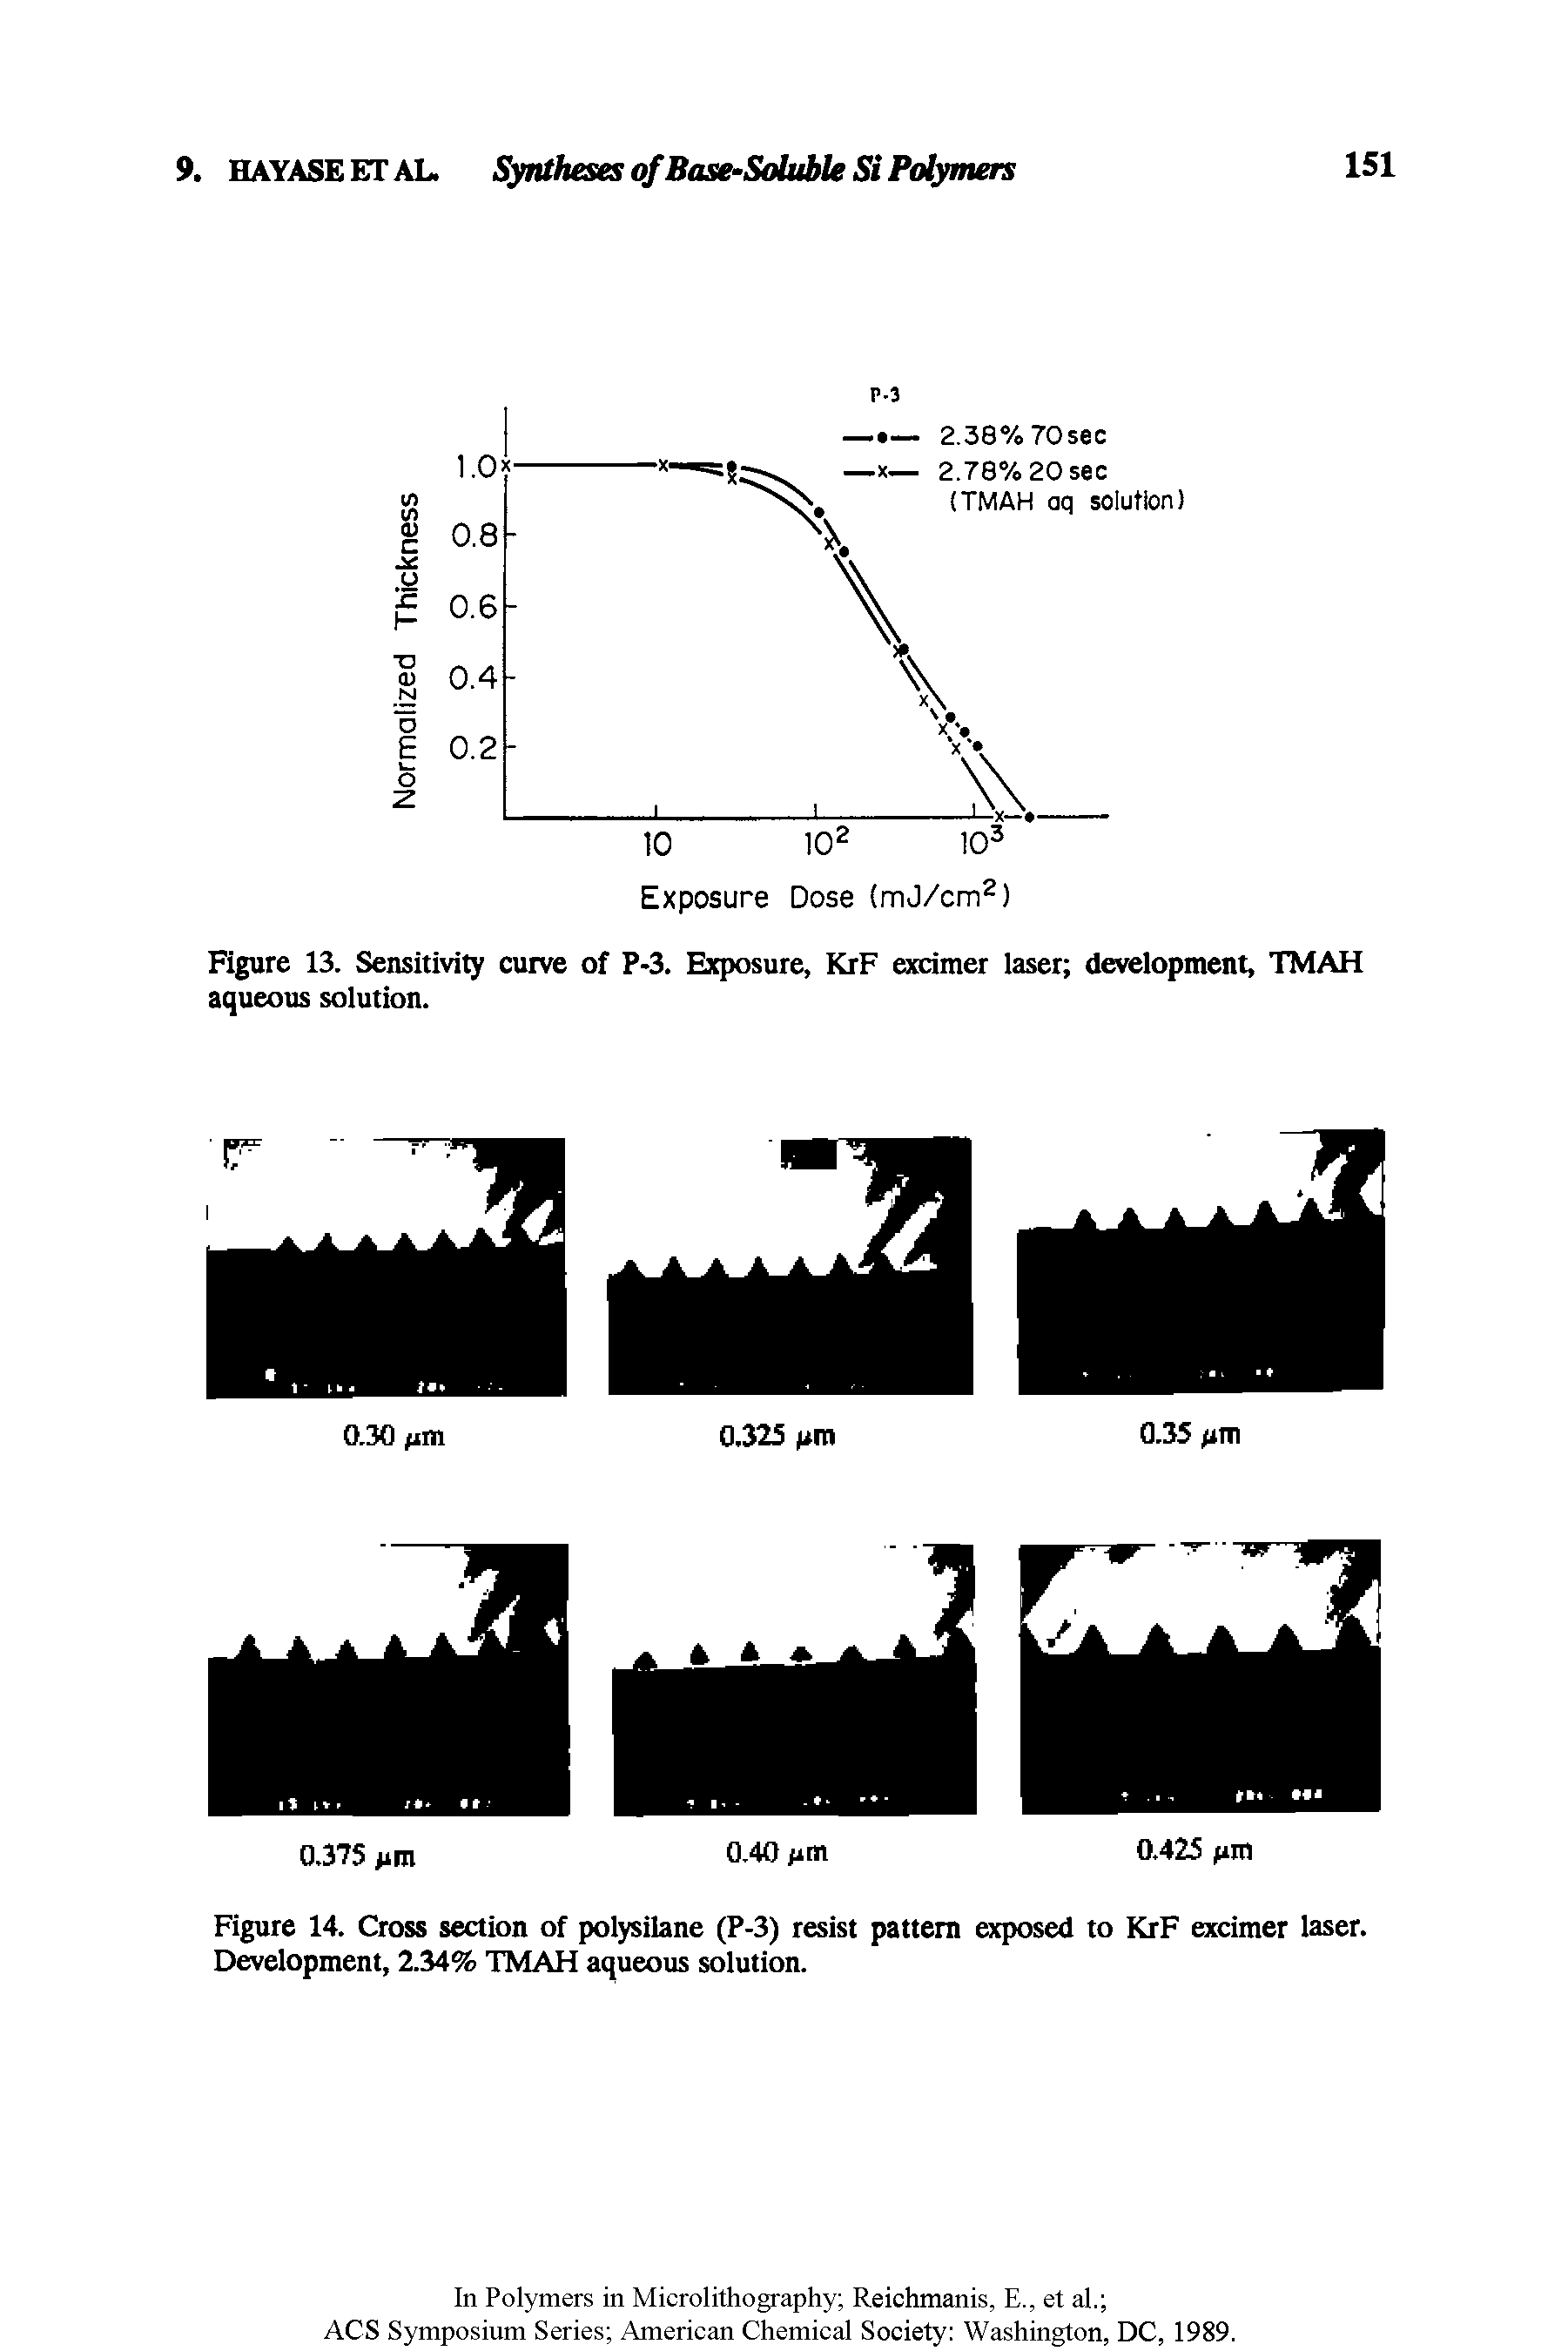 Figure 14. Cross section of polysilane (P-3) resist pattern exposed to KrF excimer laser. Development, 2.34% TMAH aqueous solution.